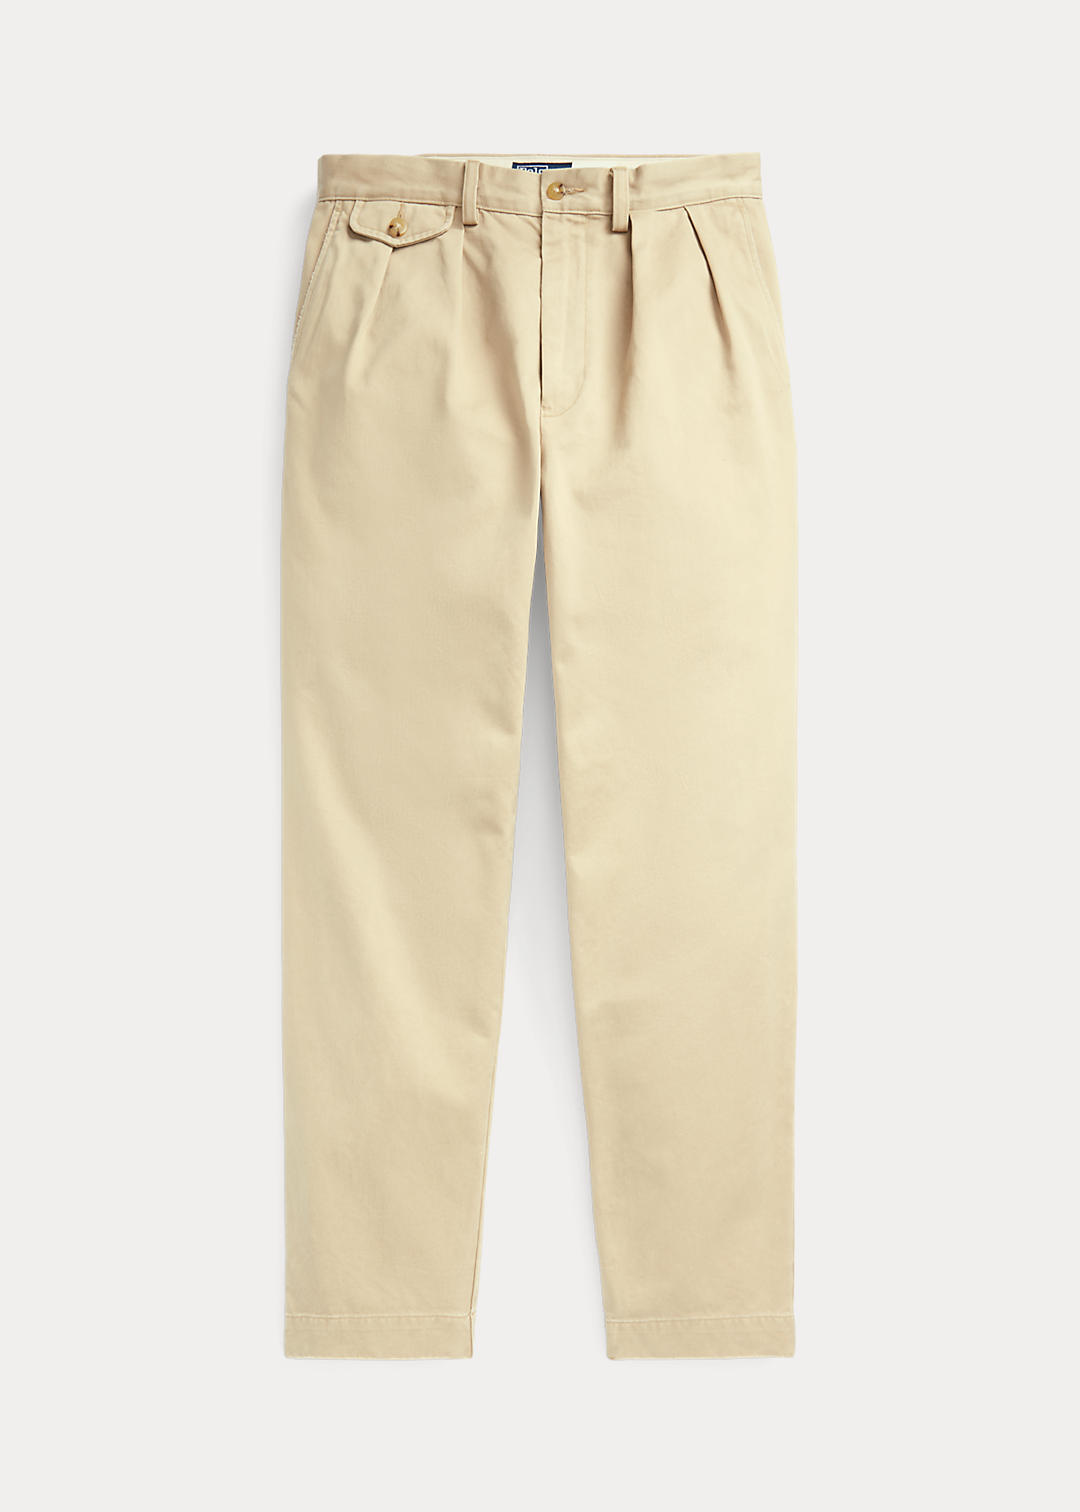 Polo Ralph Lauren Whitman Relaxed Fit Pleated Chino Trouser 2